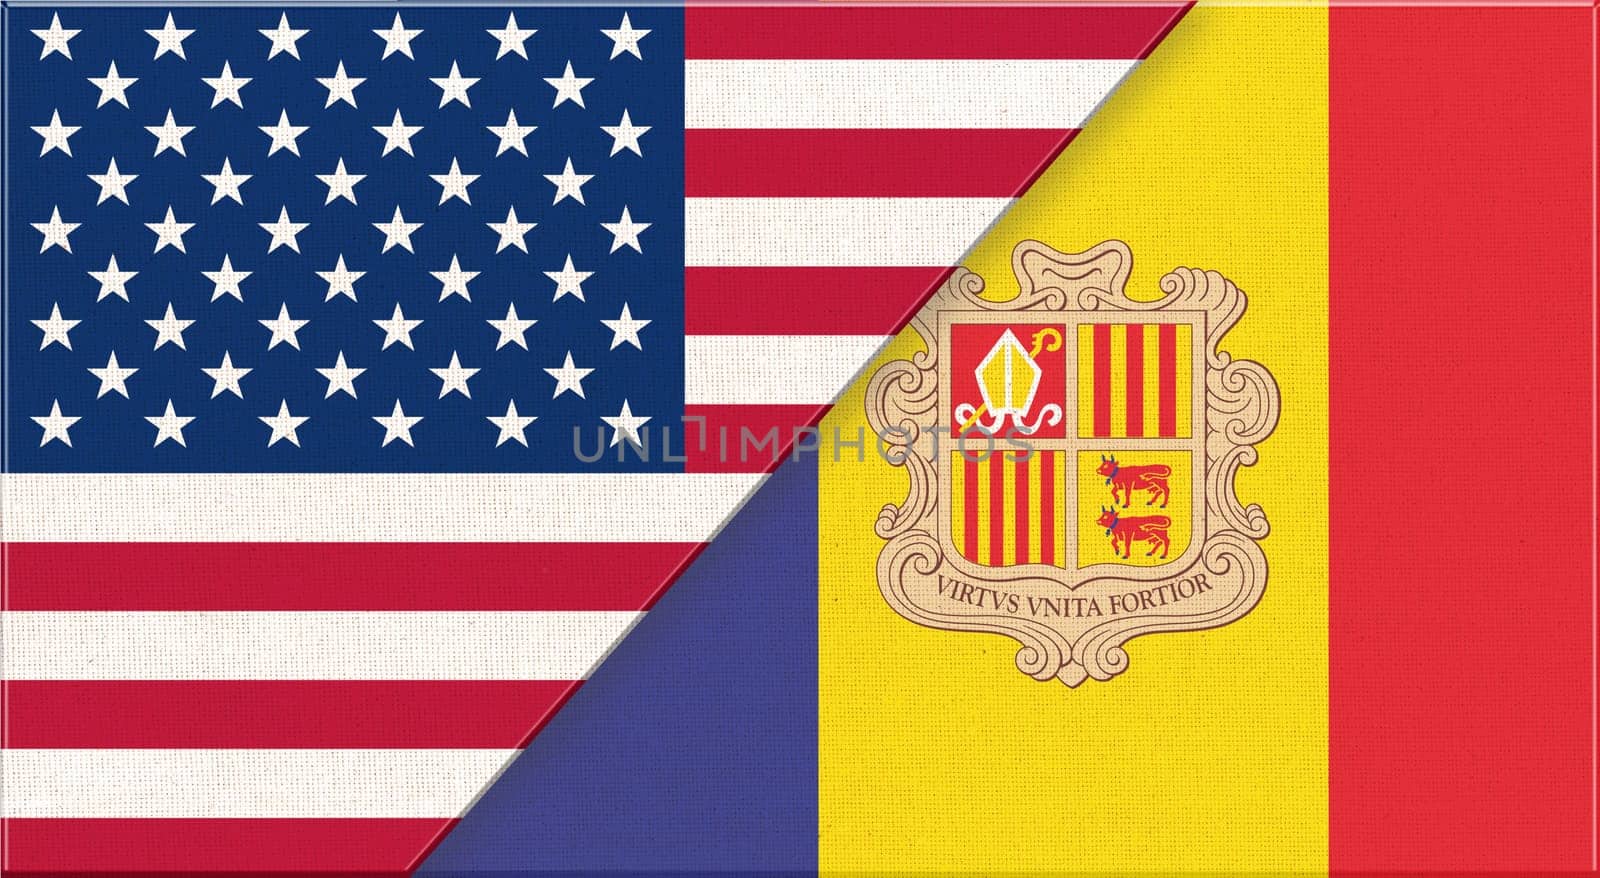 Flags of USA and Andorra. American and Andoran national flags on fabric surface. USA and Andorra relations. Flag of USA and Andoran - 3D illustration. Two Flag Together - Fabric Texture